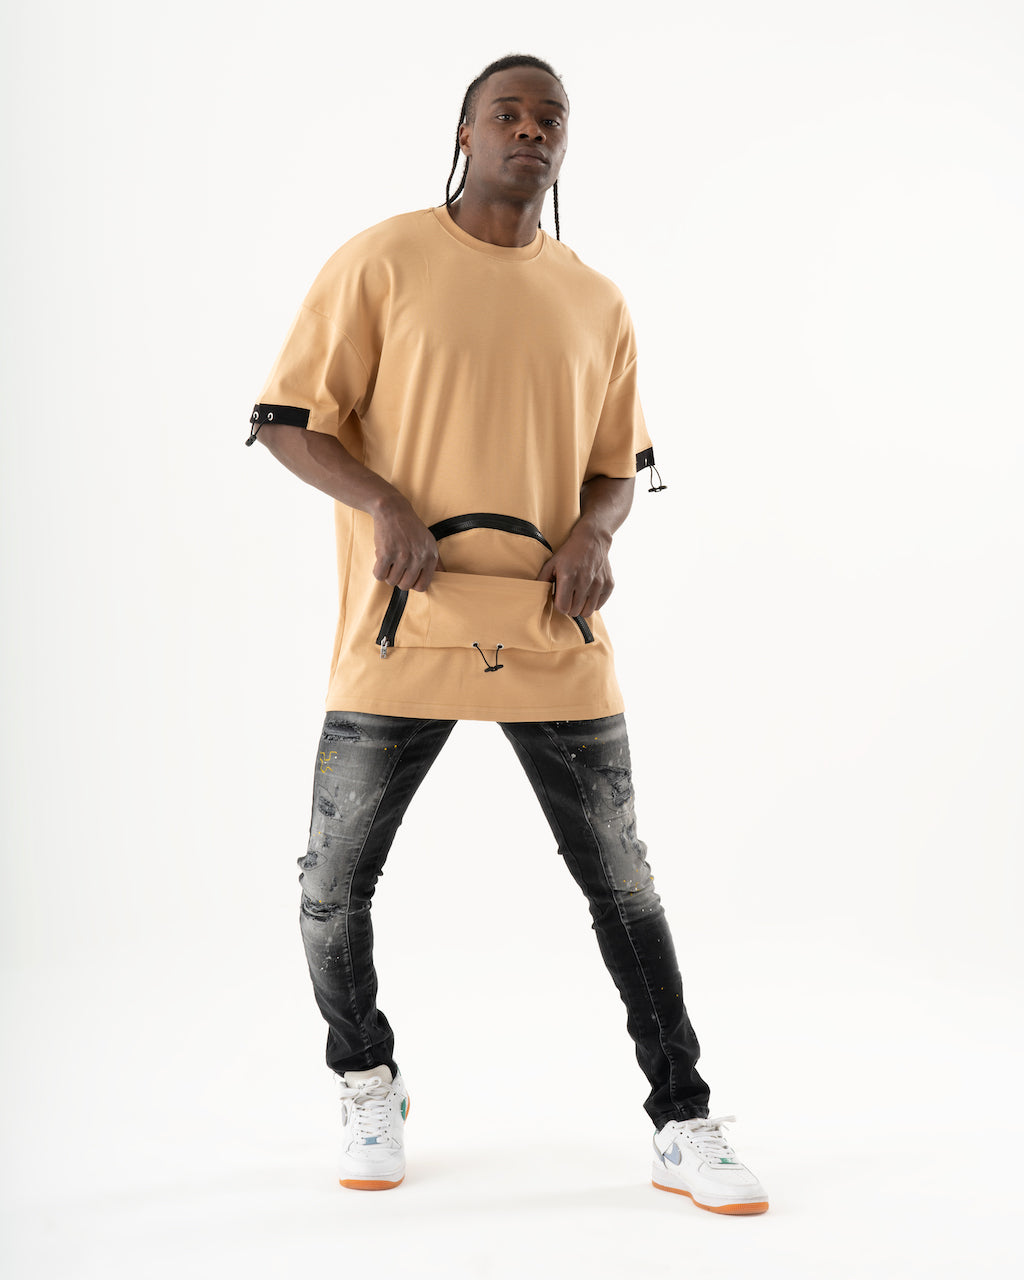 A man wearing a tan ENRAGE t-shirt and jeans, made of elastic fabric for a smooth feel.